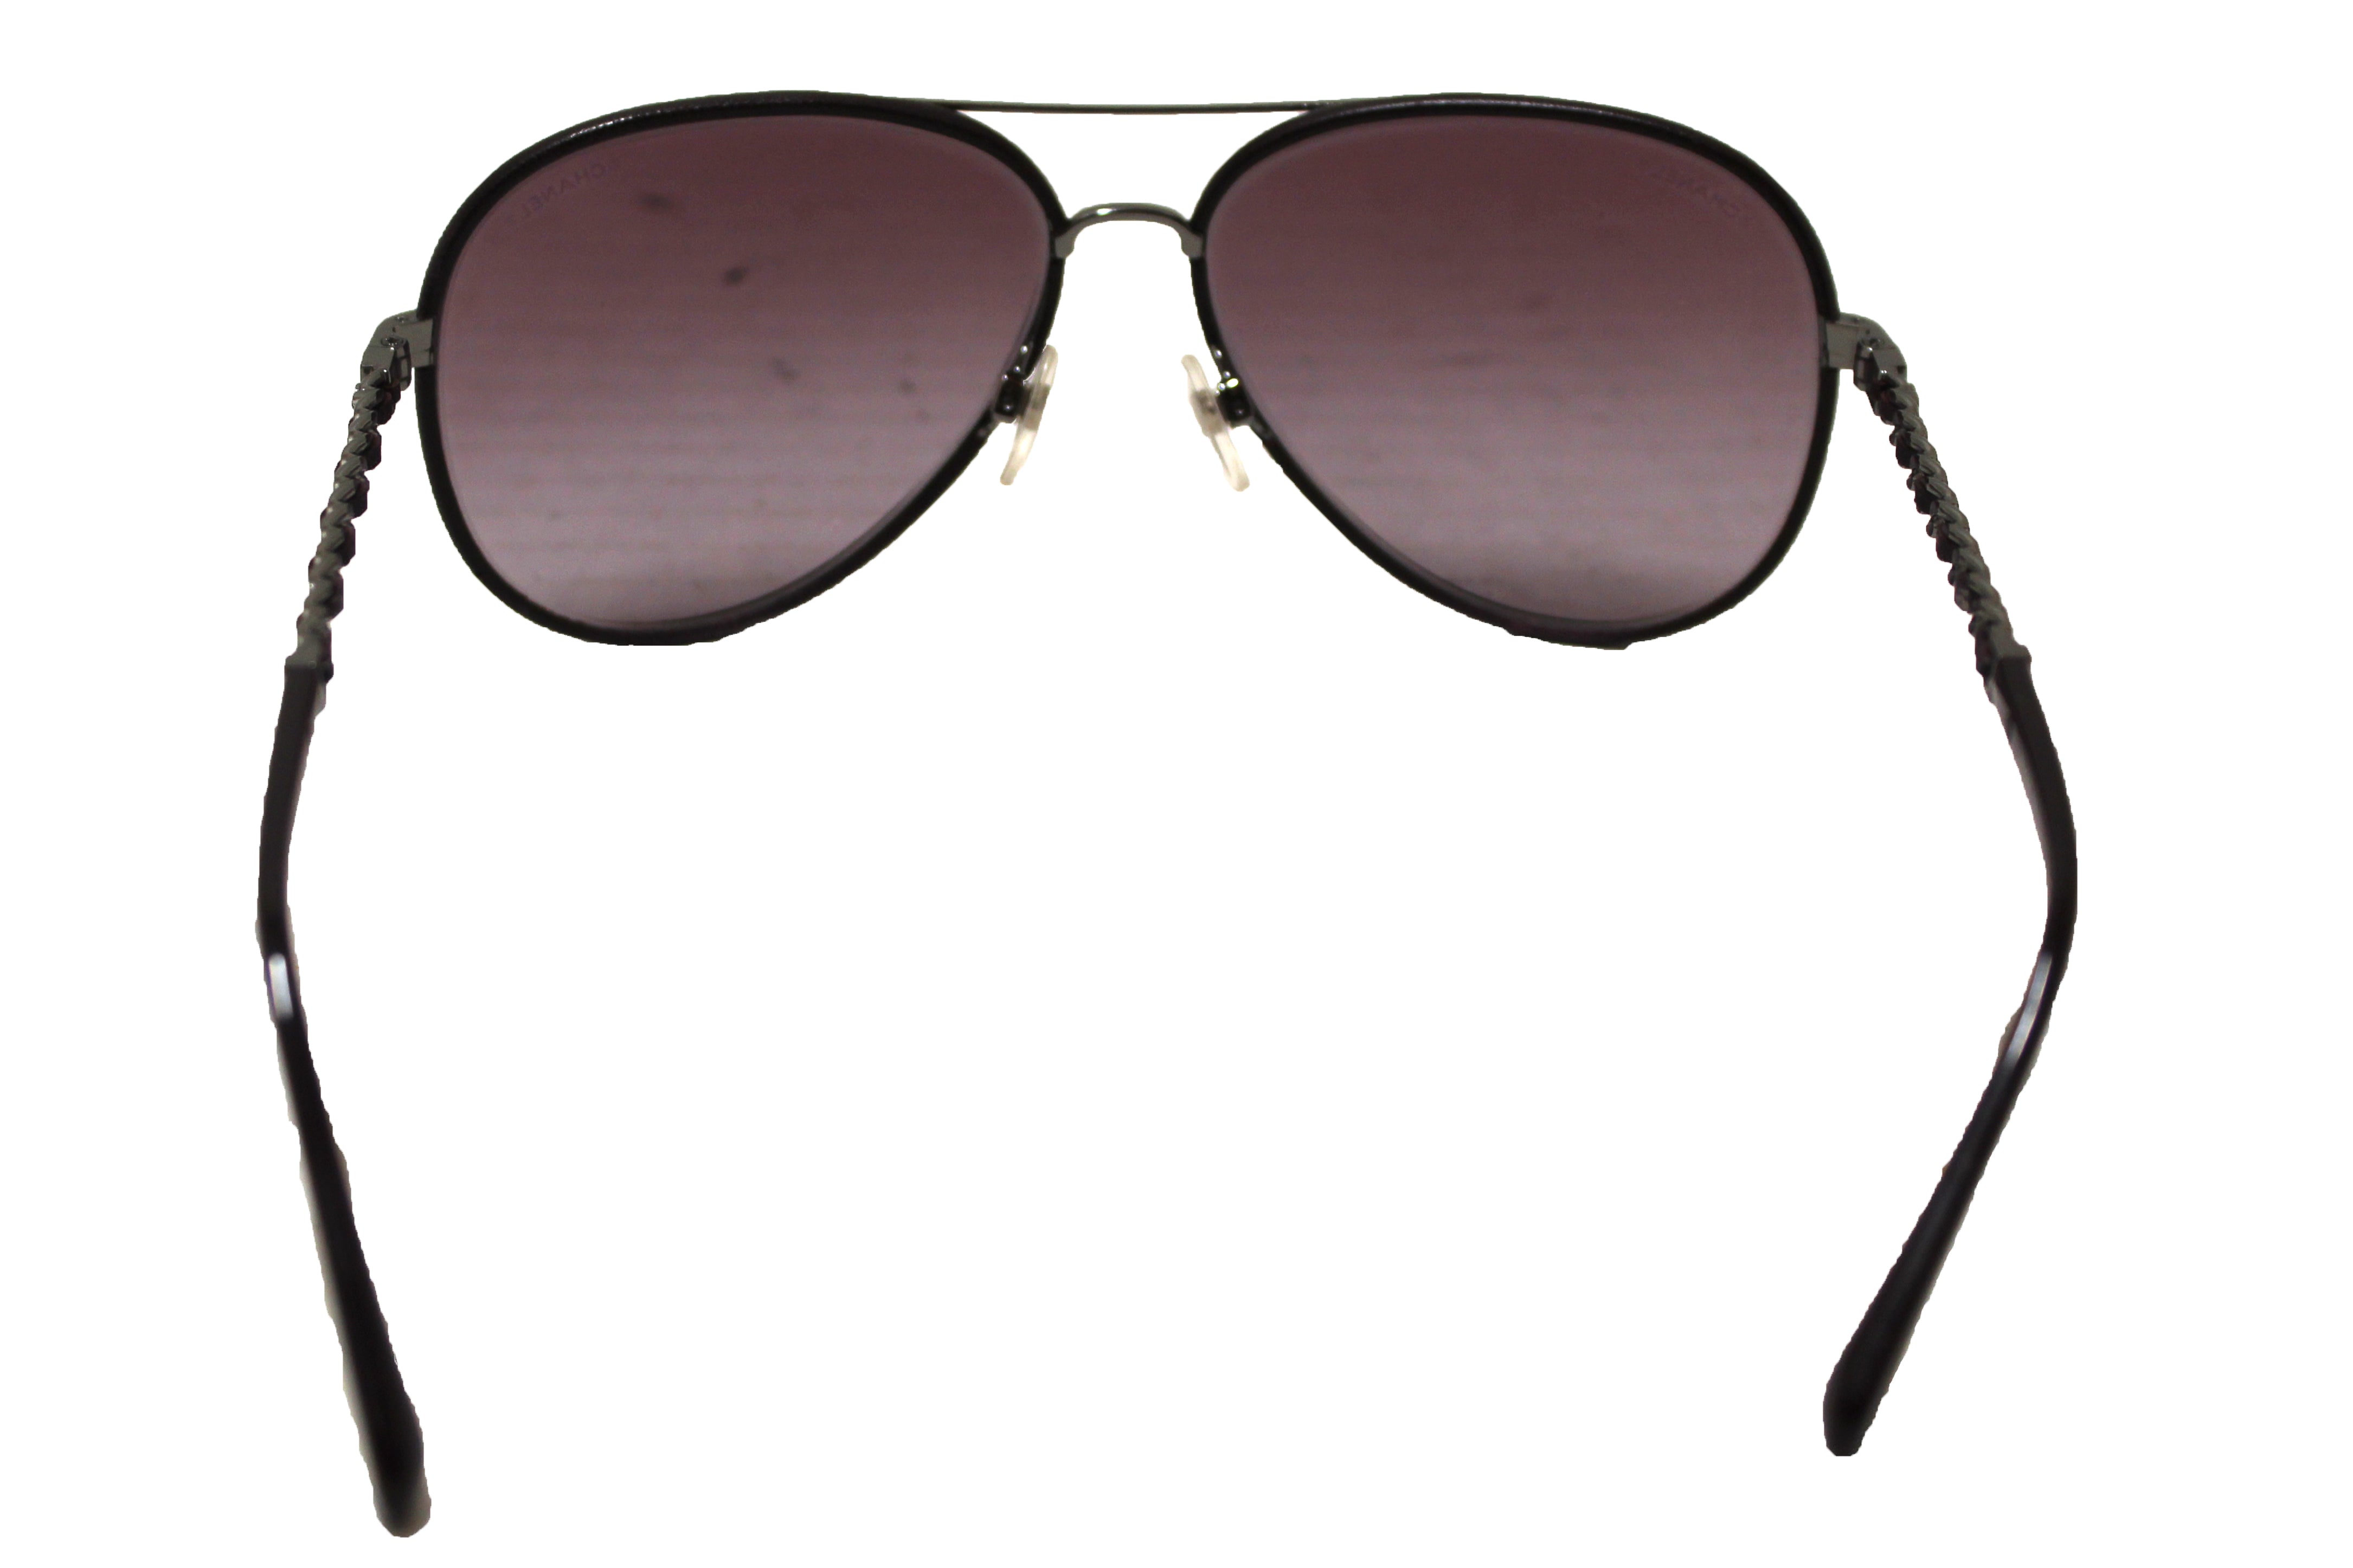 chanel aviator sunglasses with leather sides